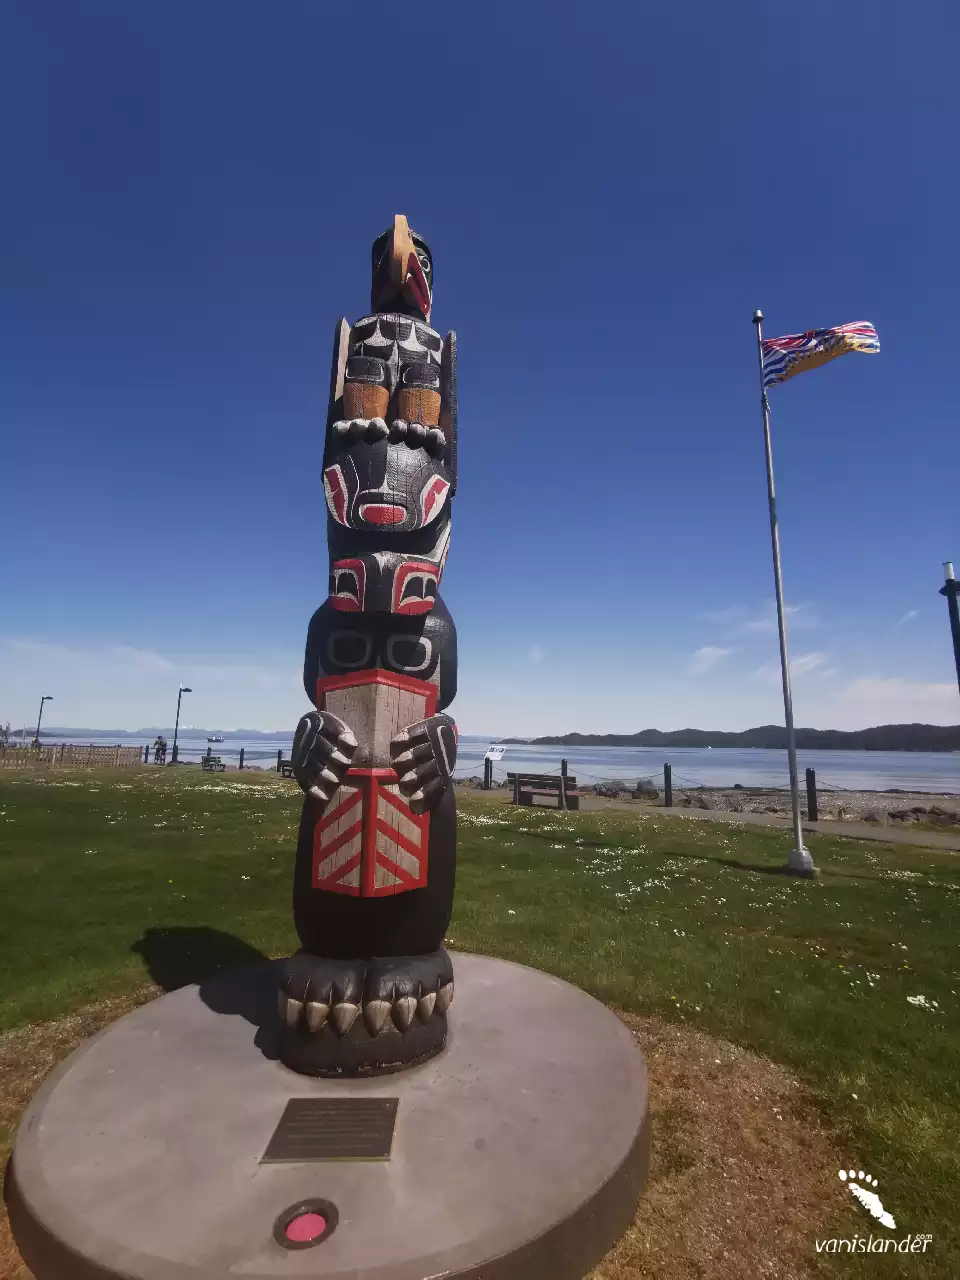 View of A Statue in Port Hardy, Vancouver Island